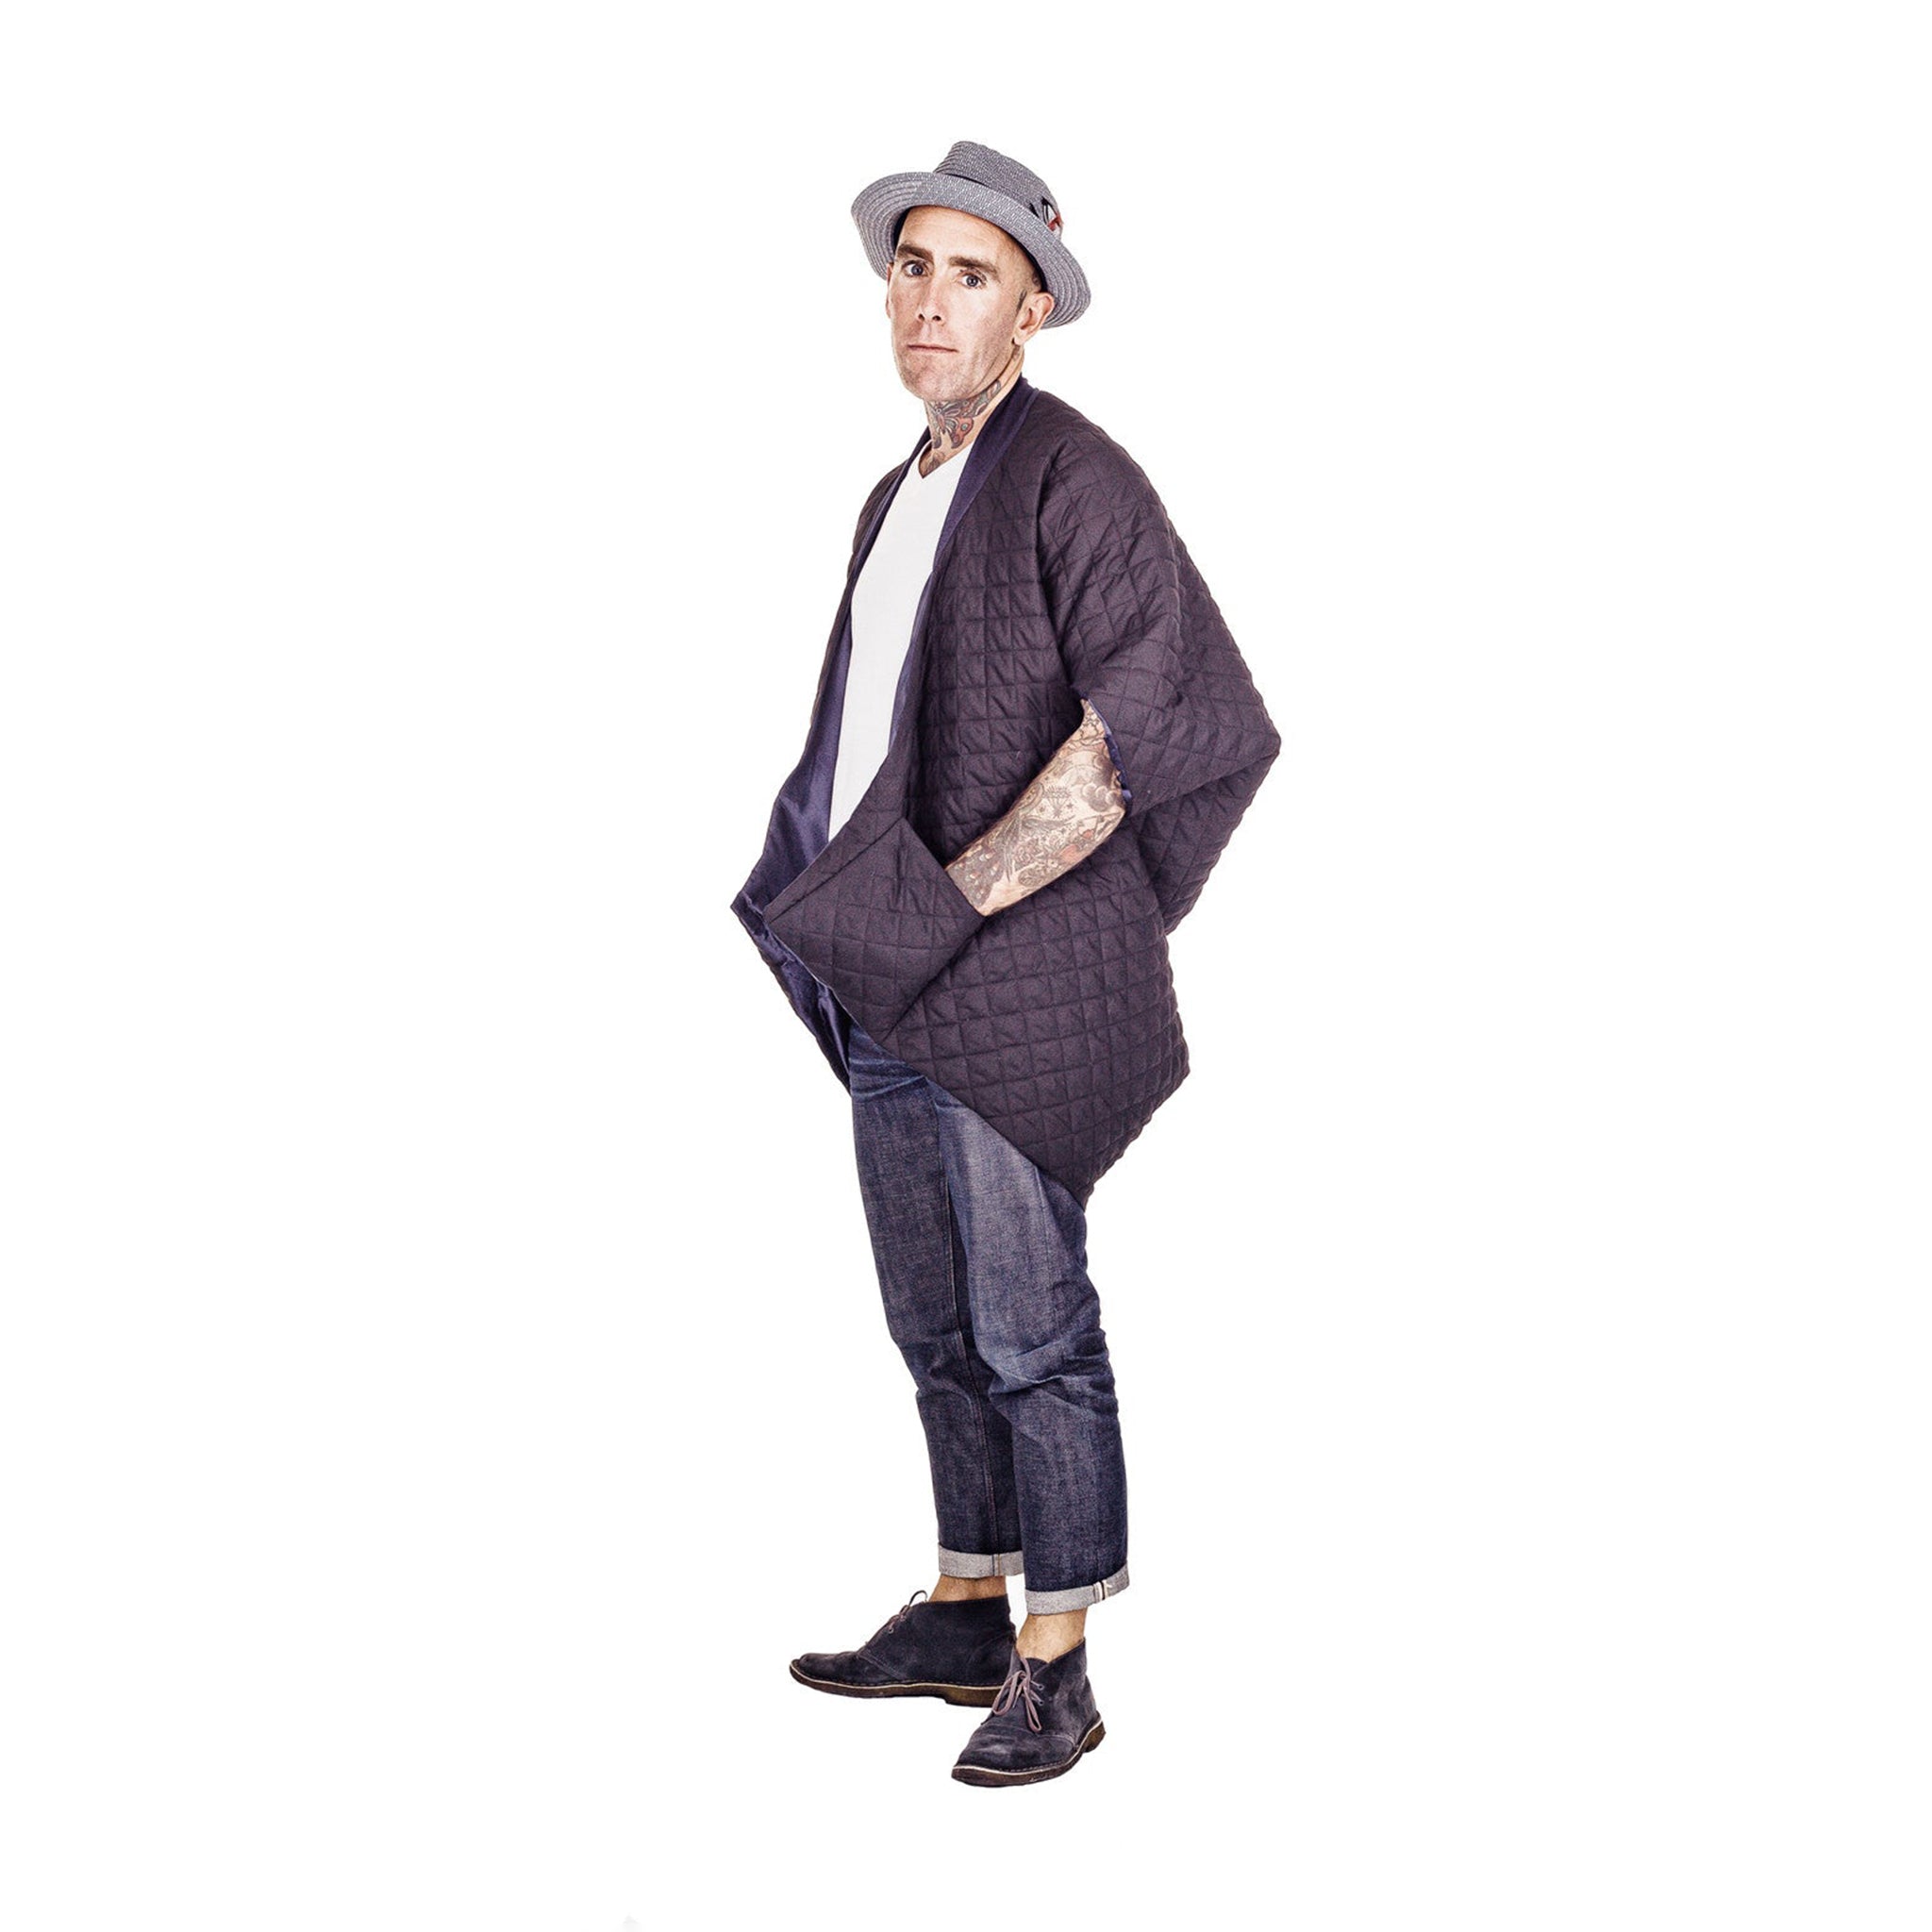 Man wearing The Costume Room The Gar coat kimono style black linen quilted coat with navy collar